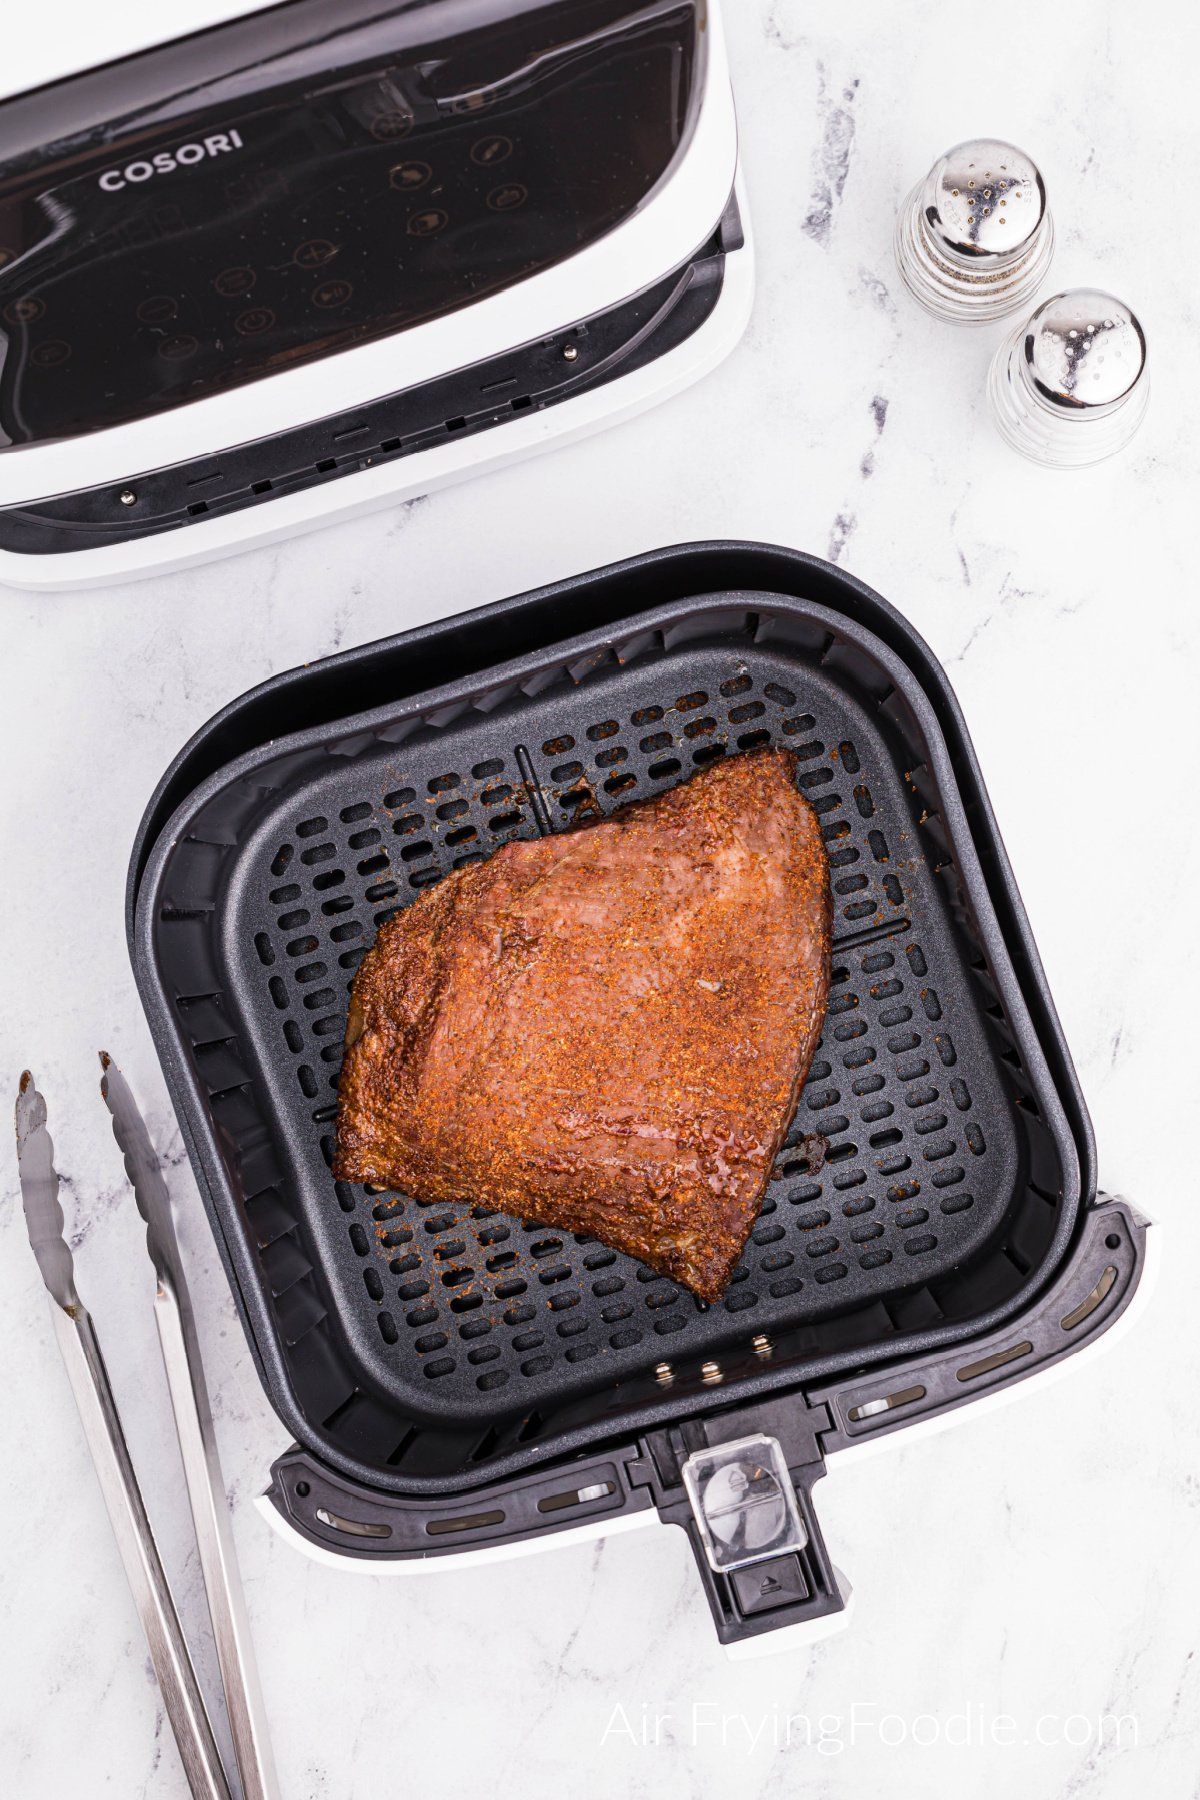 Seasoned and air fried flank steak in the basket of the air fryer.